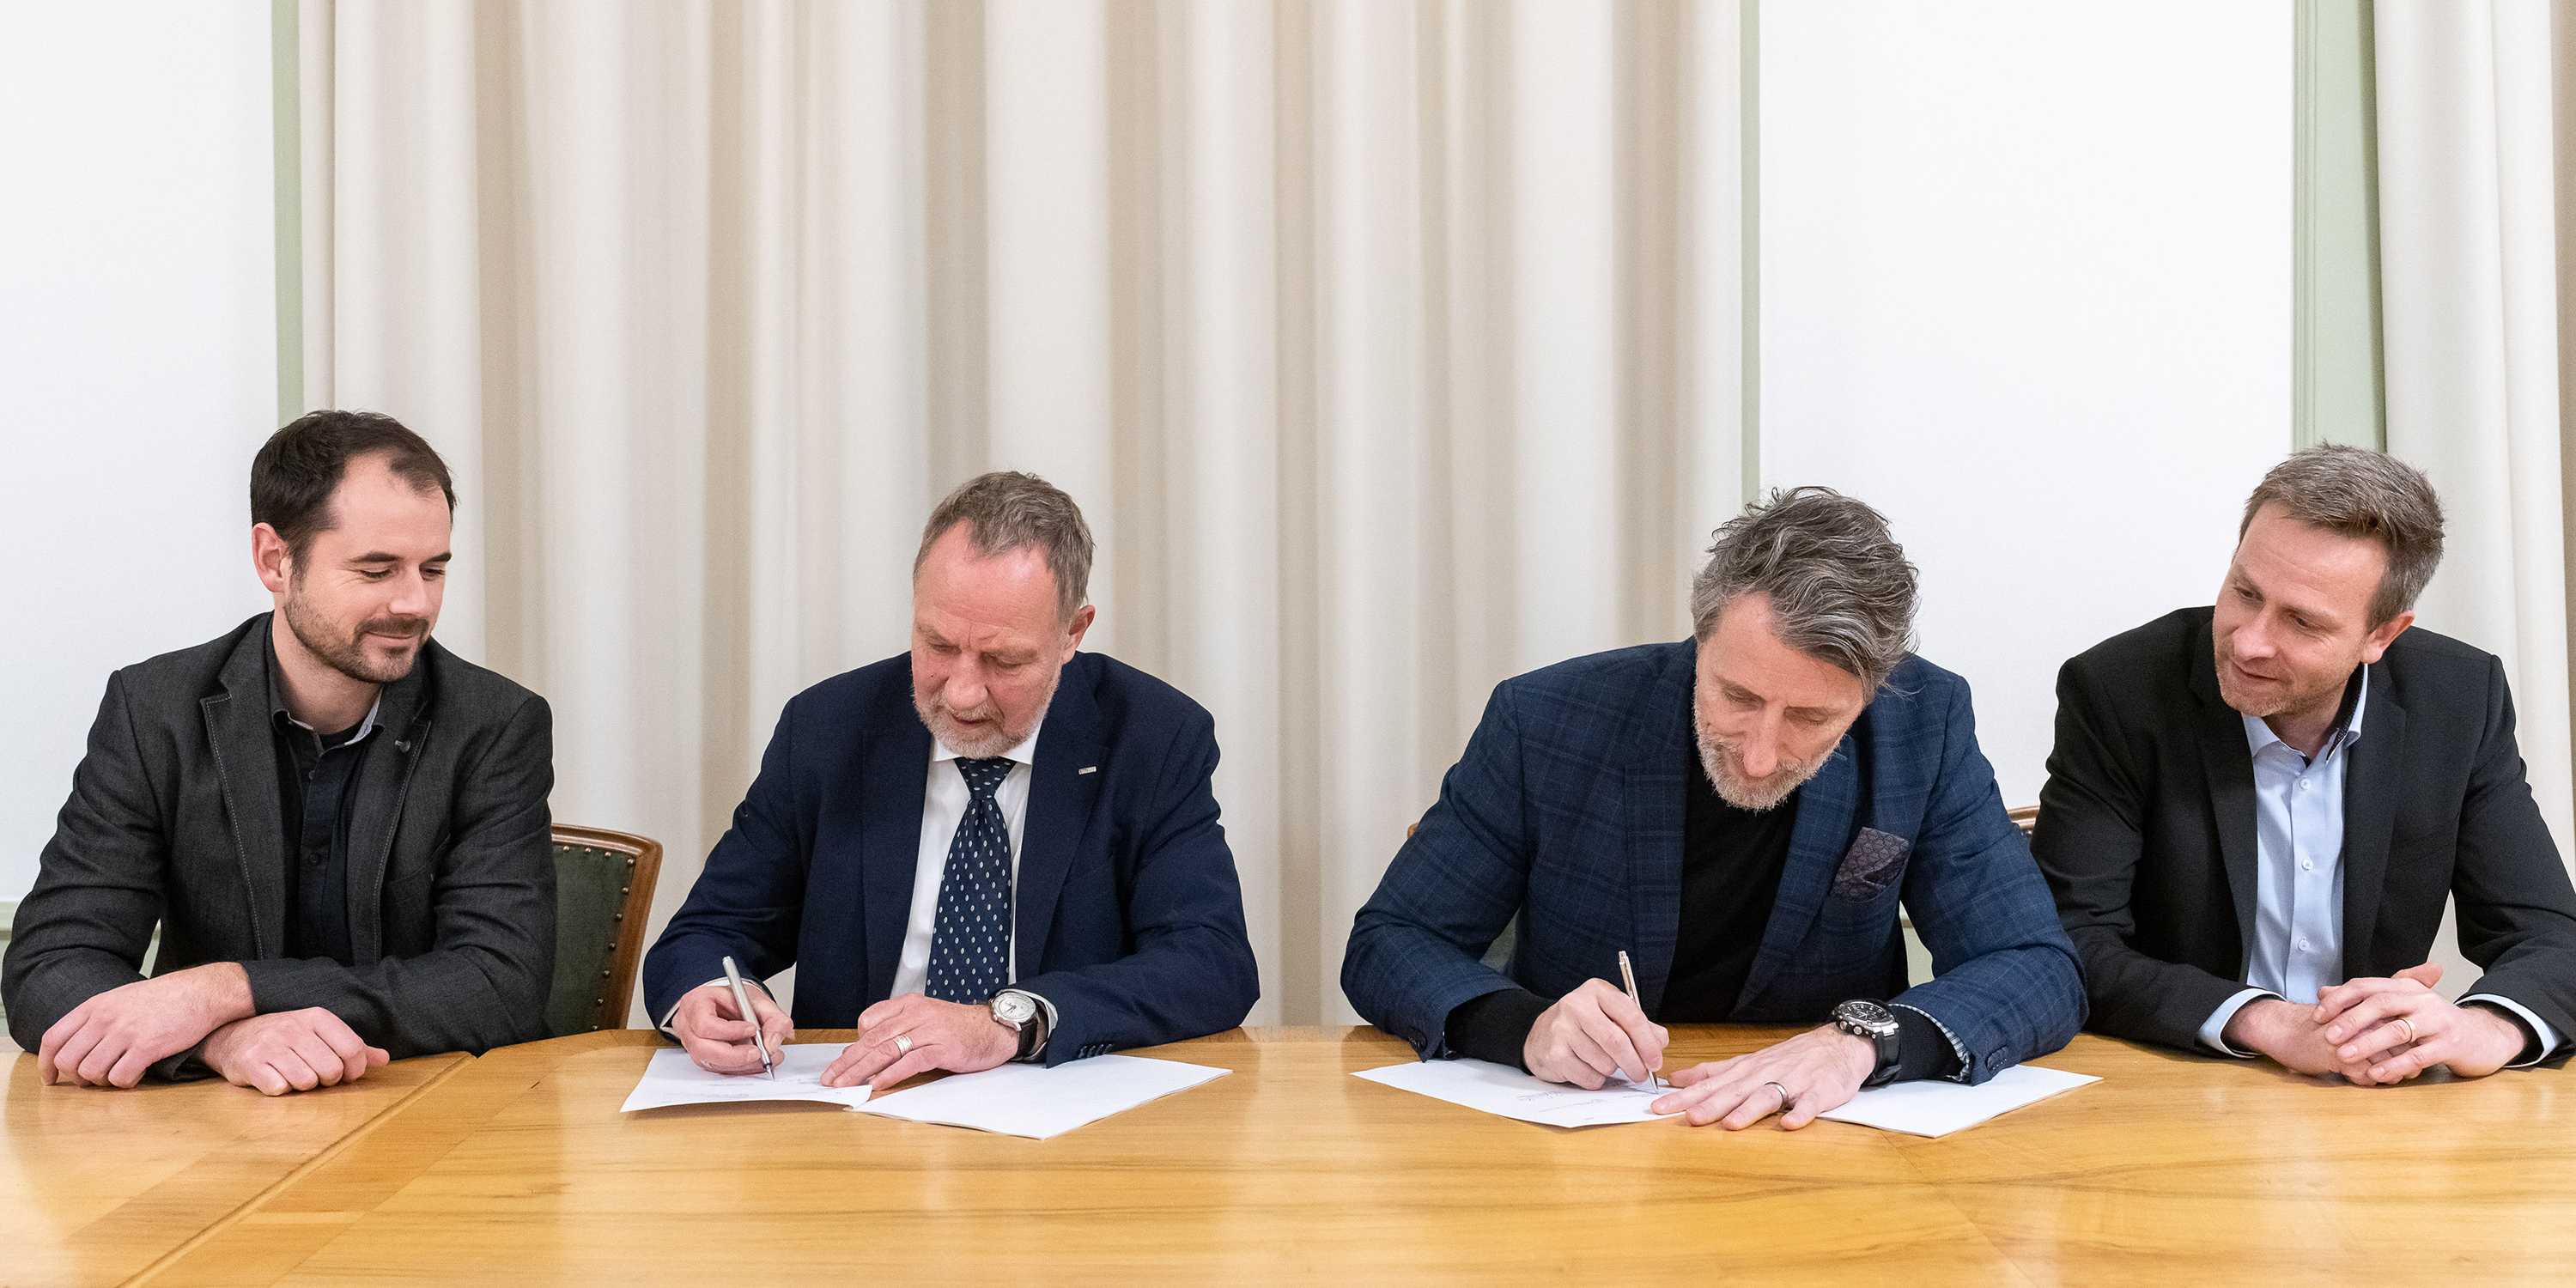 Prof. Dr. Detlef Günther (2nd from left) and Dr. Thomas Rothacher (2nd from right) sign the agreement 